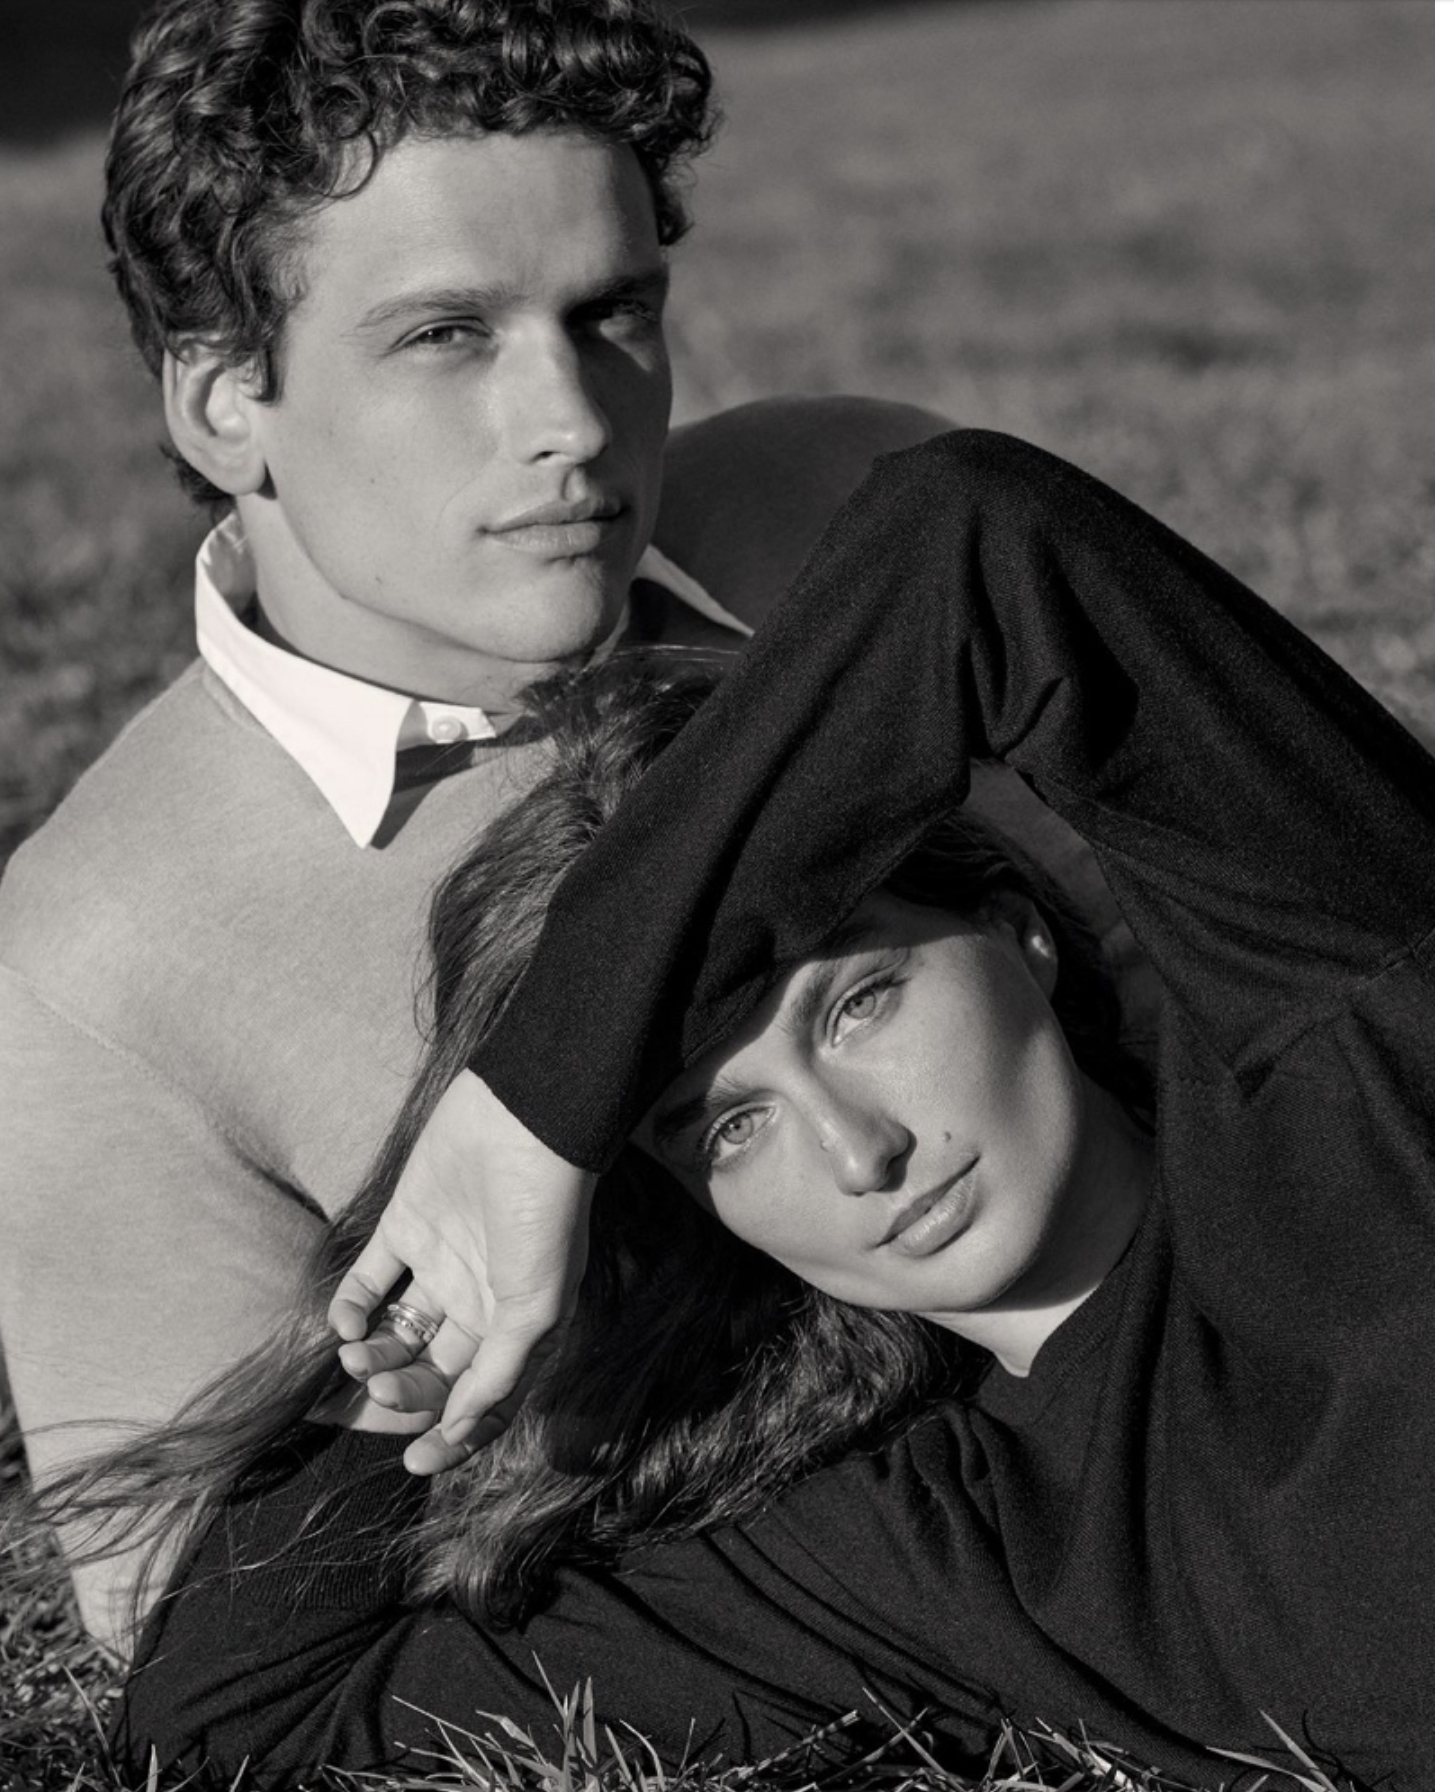 Ralph-Lauren-Cradle-to-Cradle-Certified-Gold-Cashmere-Campaign-00006.png